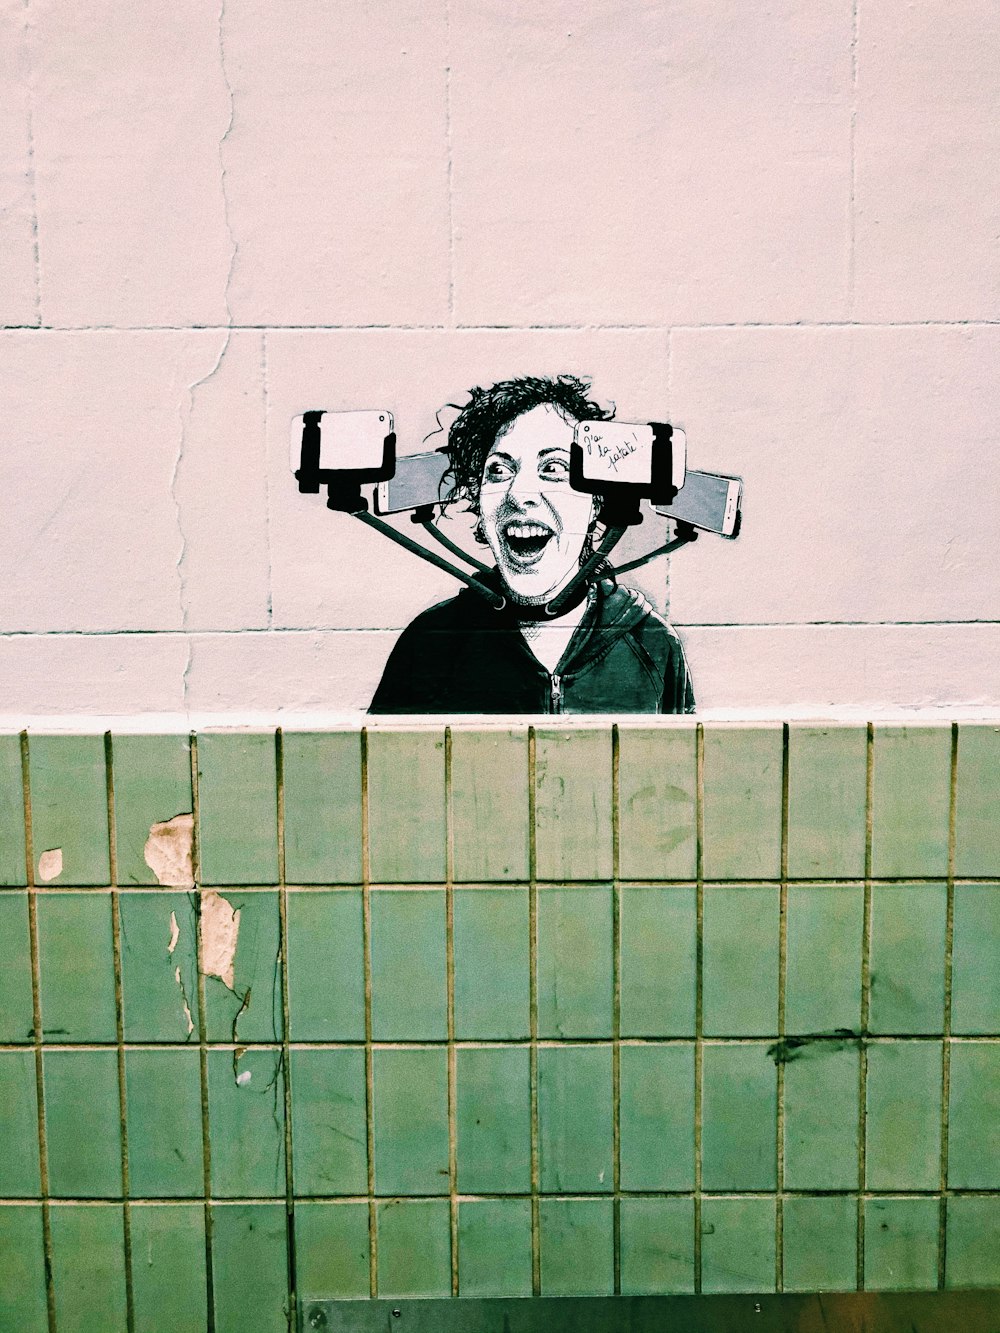 mural painting of woman's face surrounded by smartphones